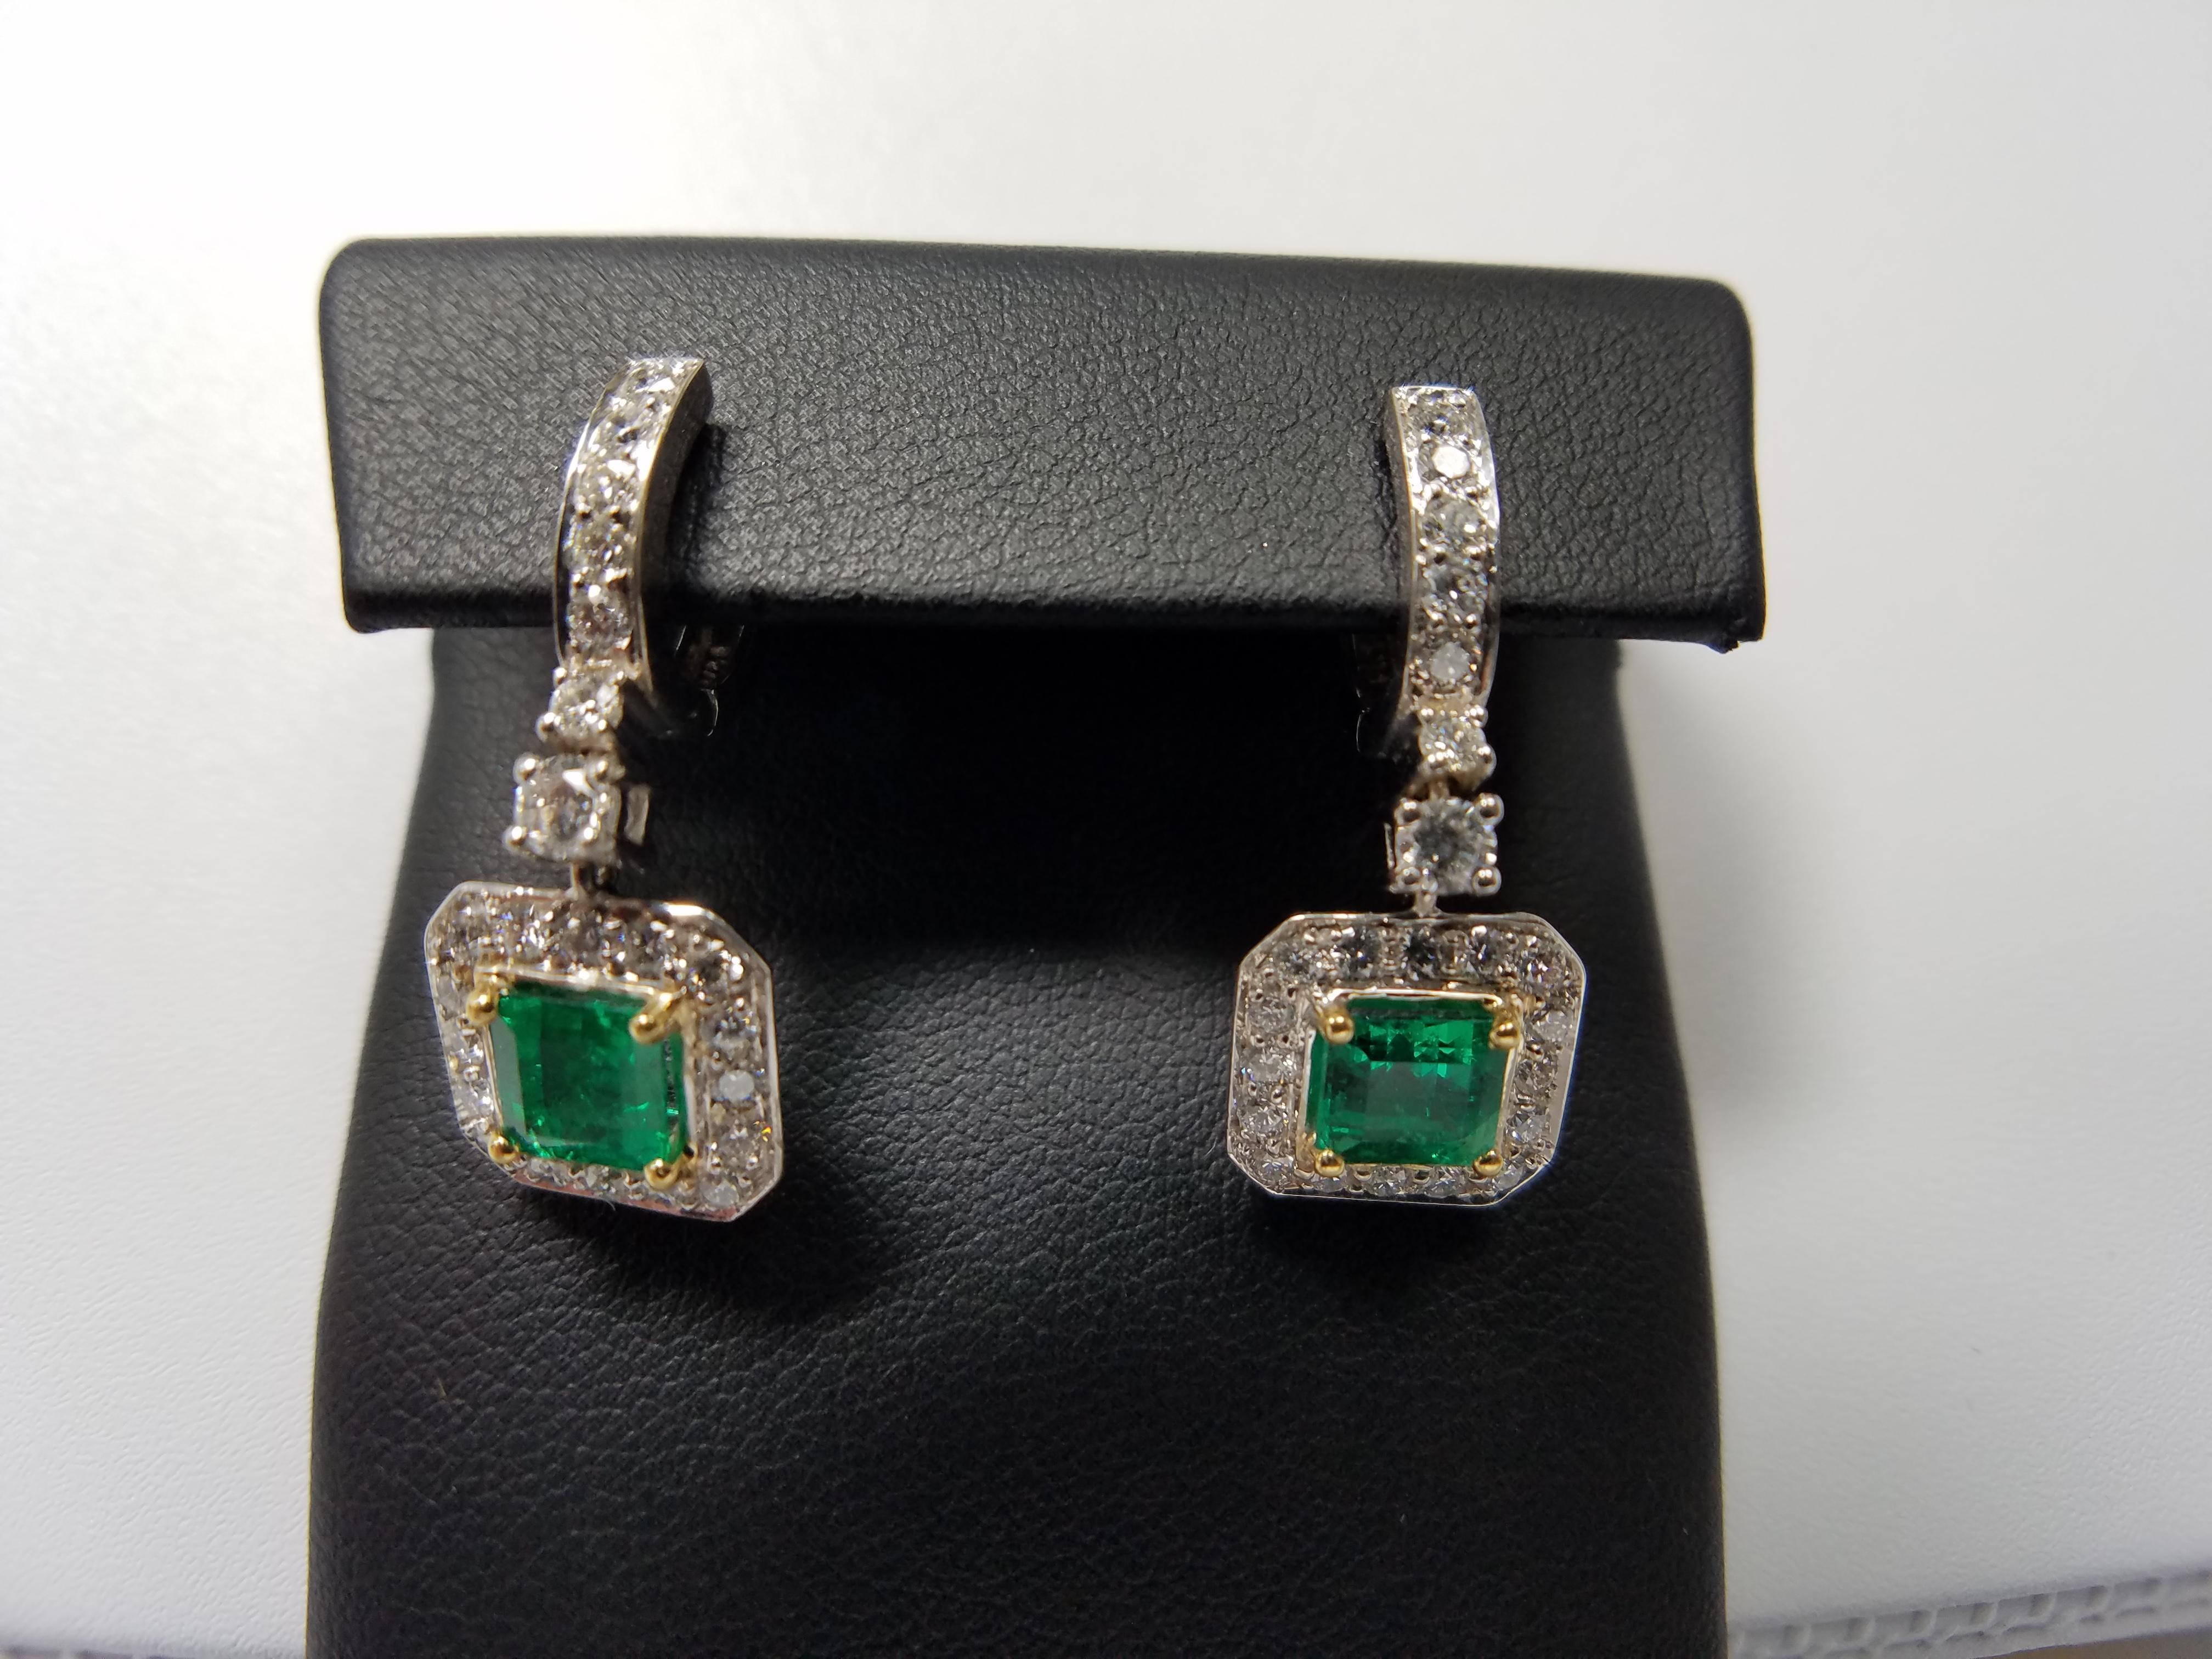 2 Fine Colombian Emeralds Earrings, each one having a center stone of aprox 0.80 carats. Set in both 18k white gold and 14k yellow gold with 46 total diamonds weighing aprox. 1.30 carats. 